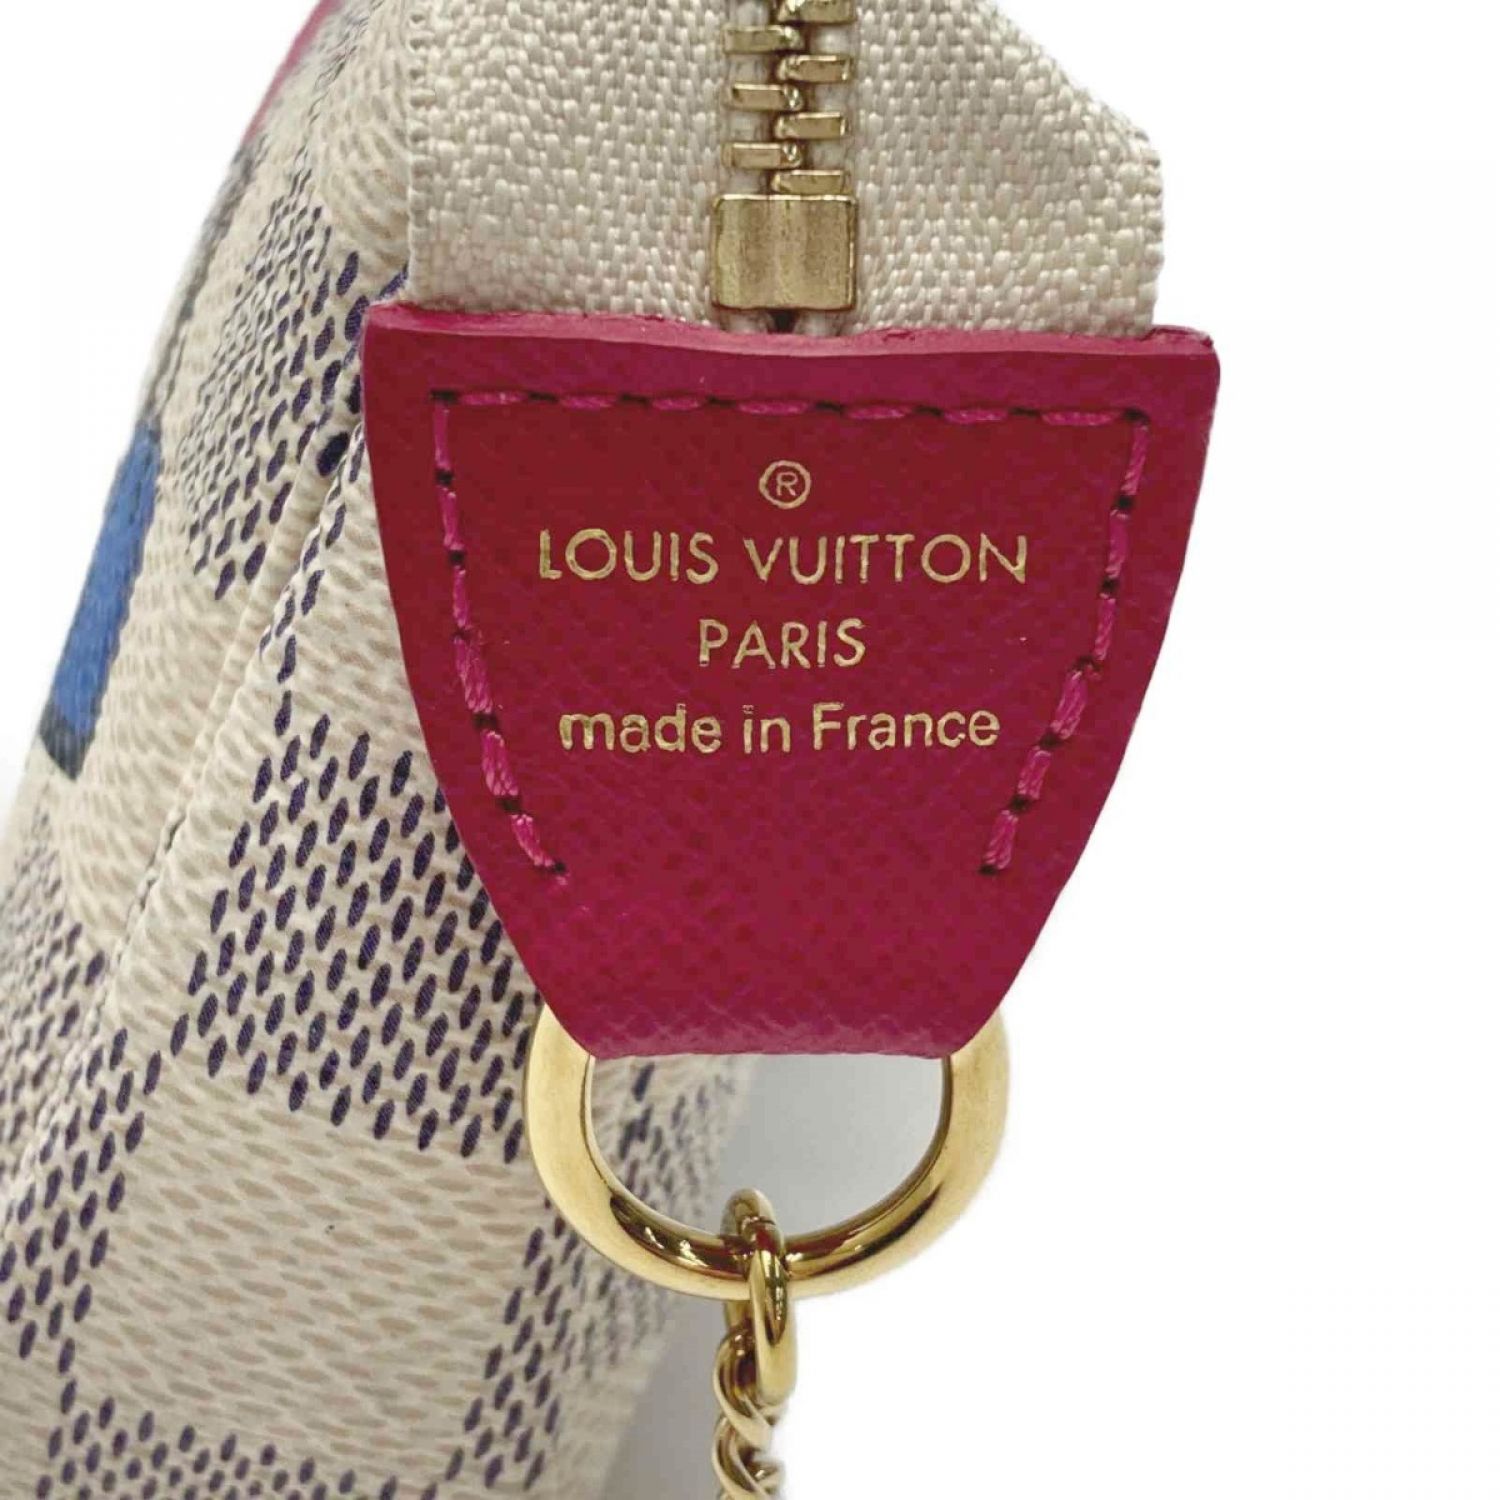 LOUIS VUITTON ルイヴィトン ダミエ アズール ミニ ポシェット アクセ